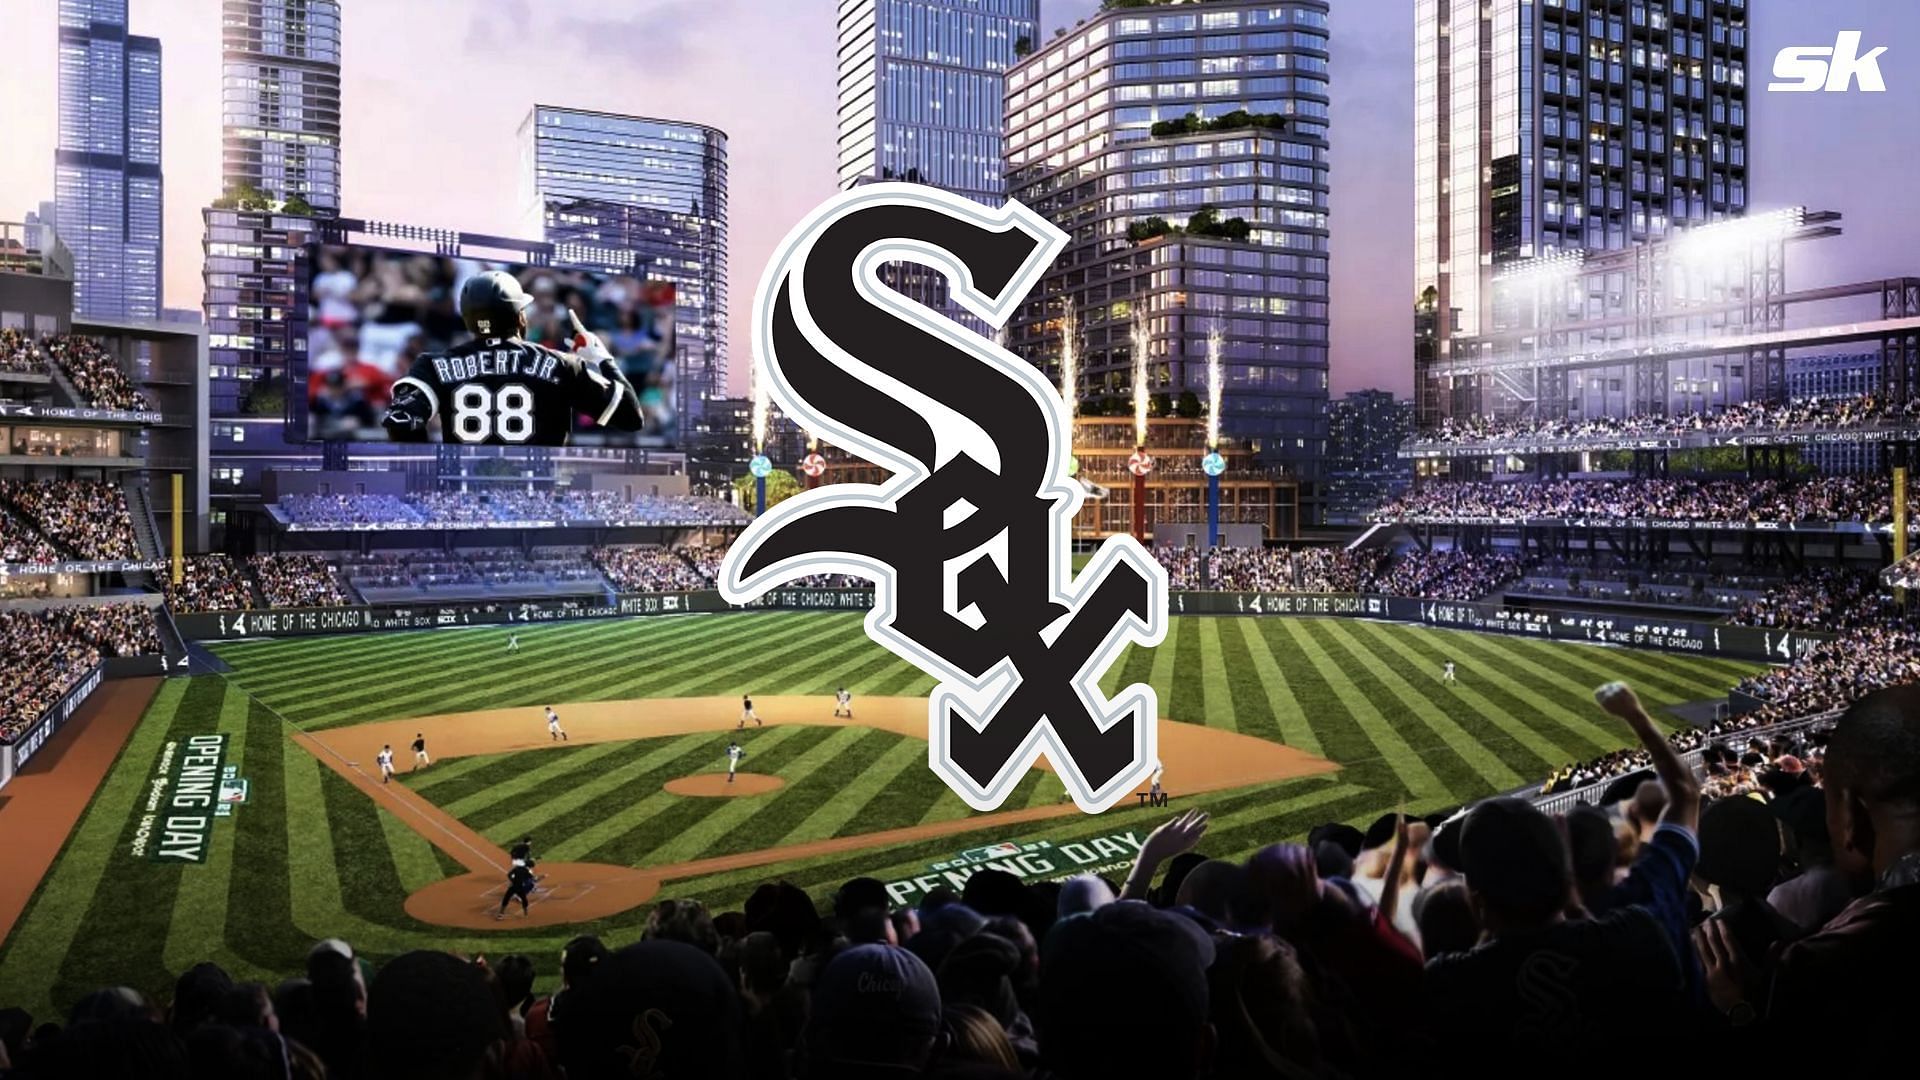 White Sox stadium might go for a huge transformation as a part of the redevelopment plans in the Soth Loop, Chicago